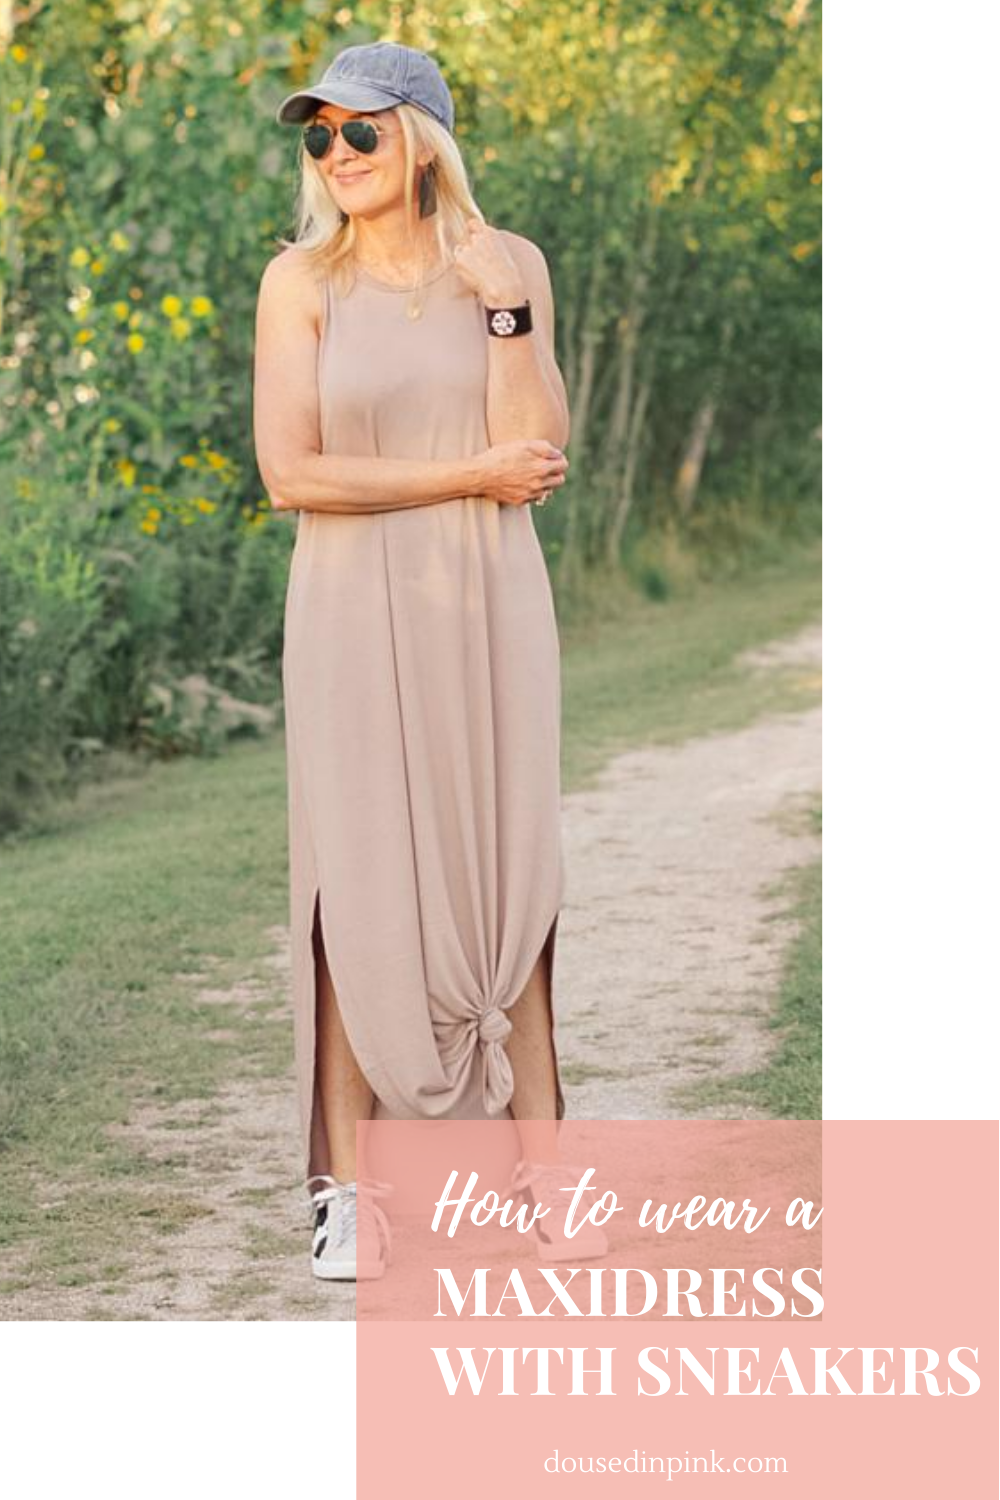 maxi dress + sneakers outfit idea